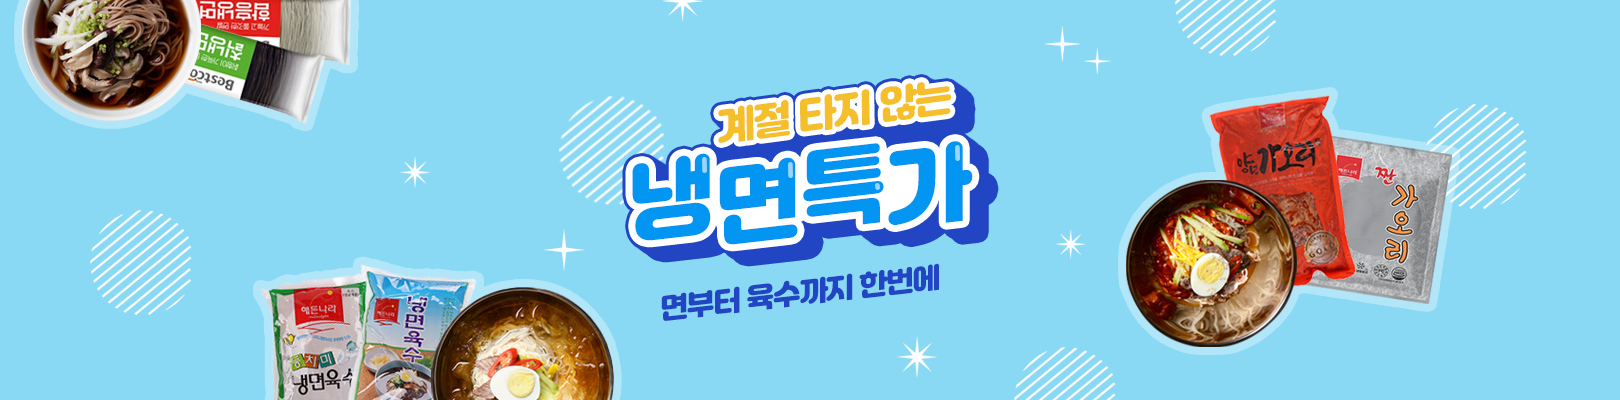 pm_naengmyeon_PC1620x400_142232.png